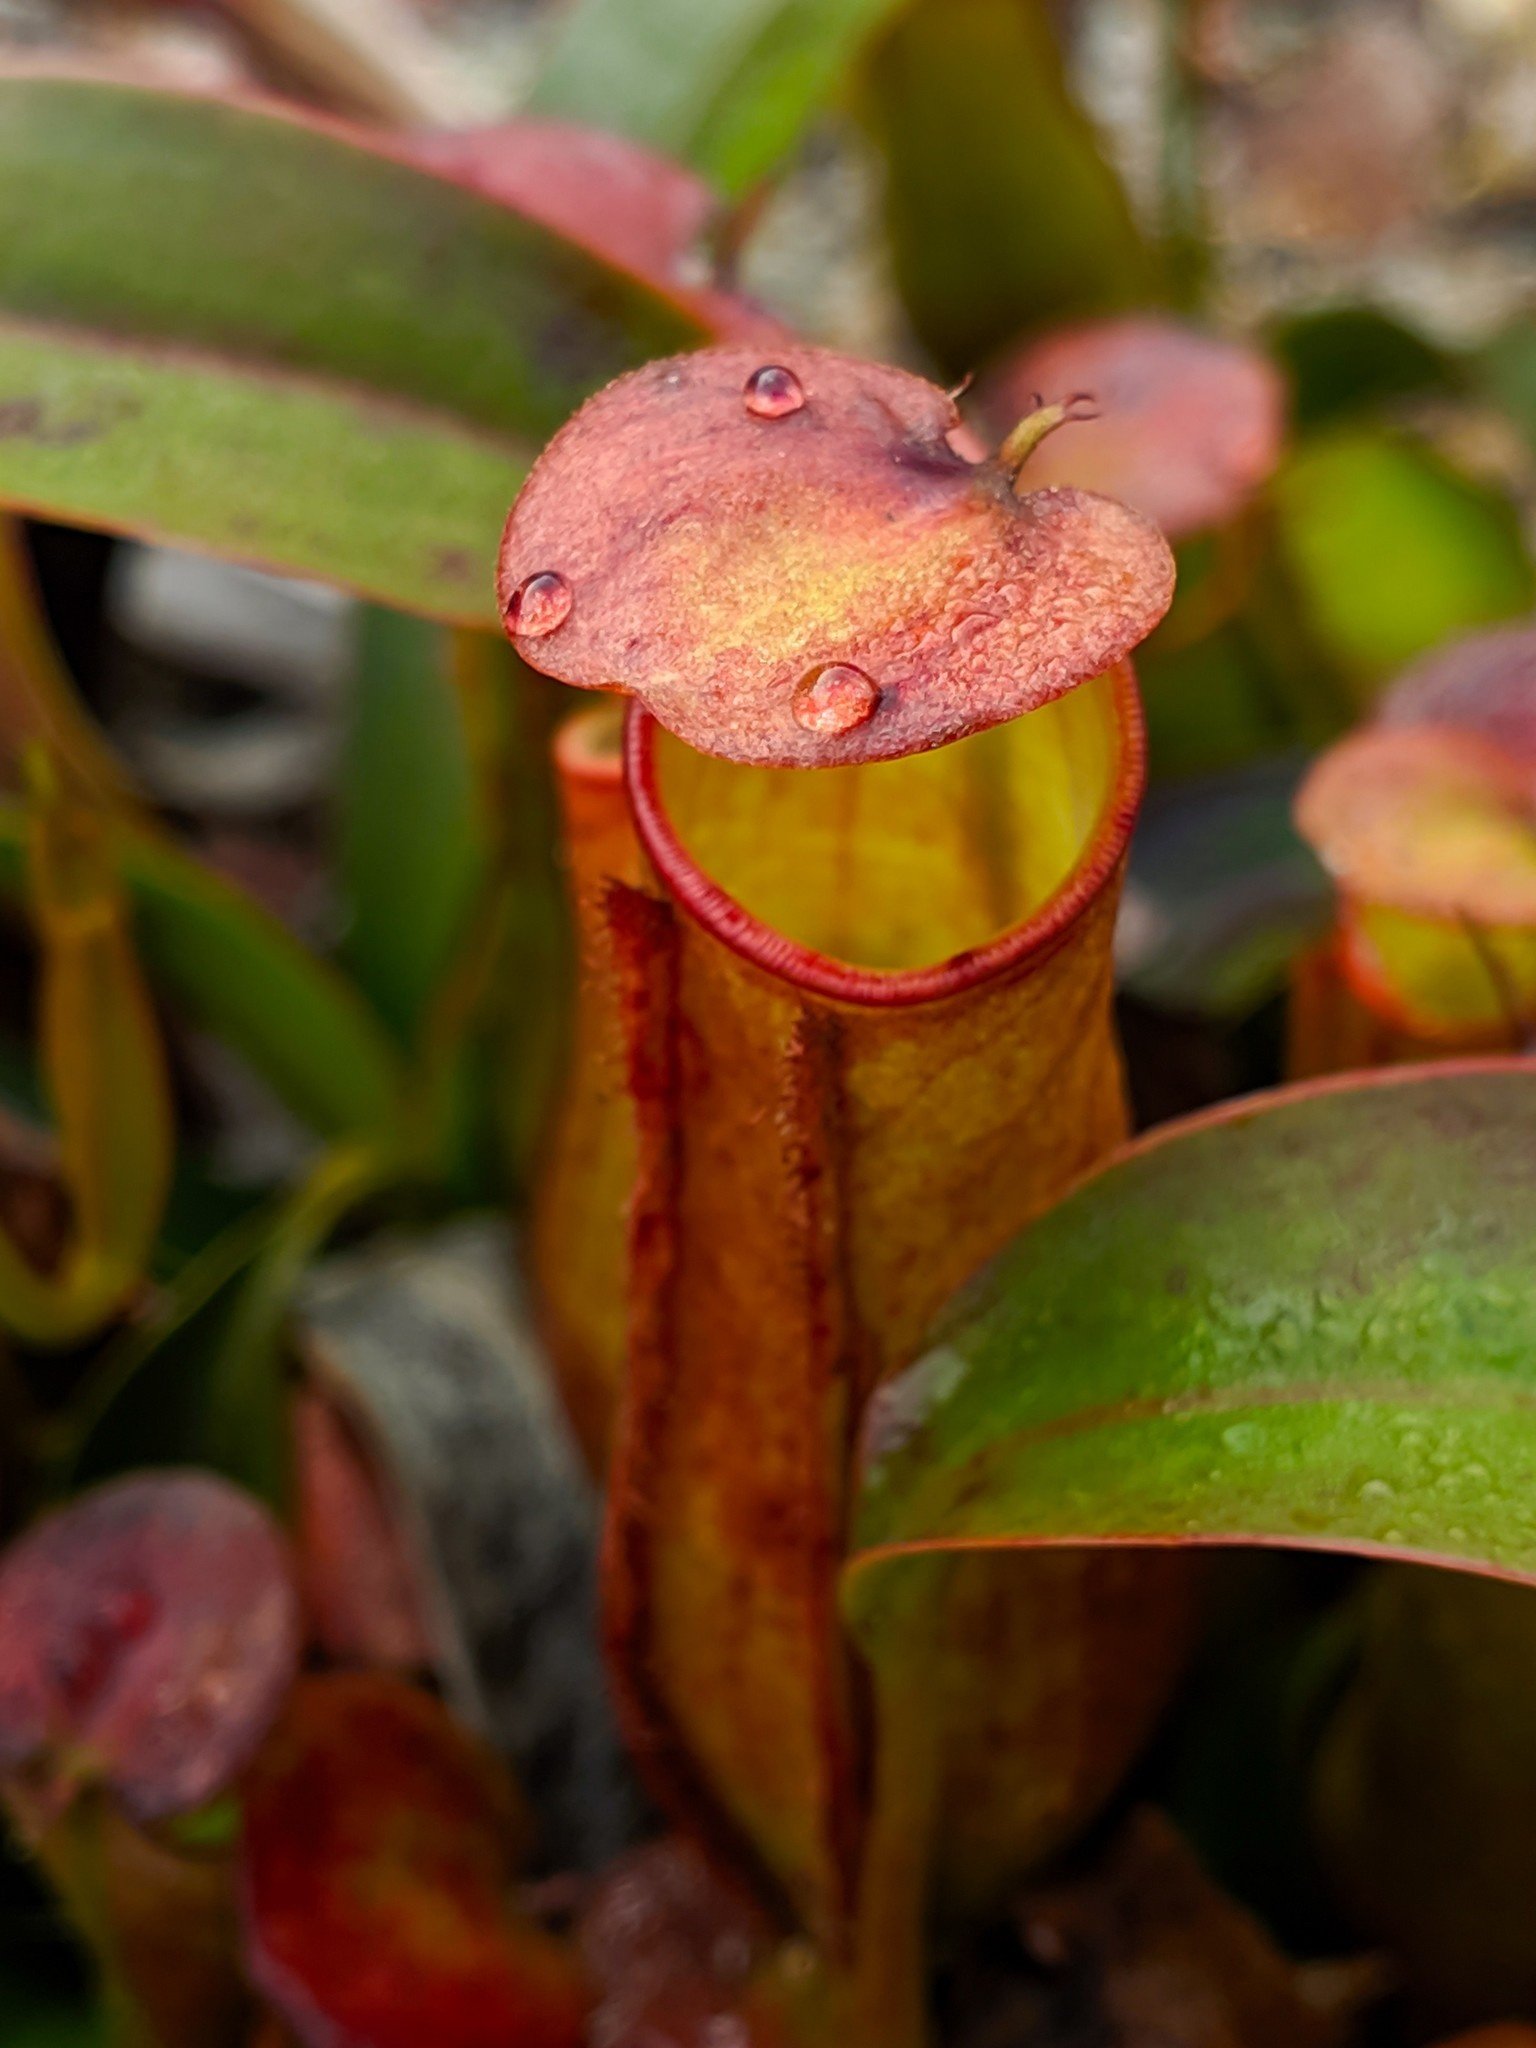 All about the pitcher plant (Nepenthes), Interesting facts